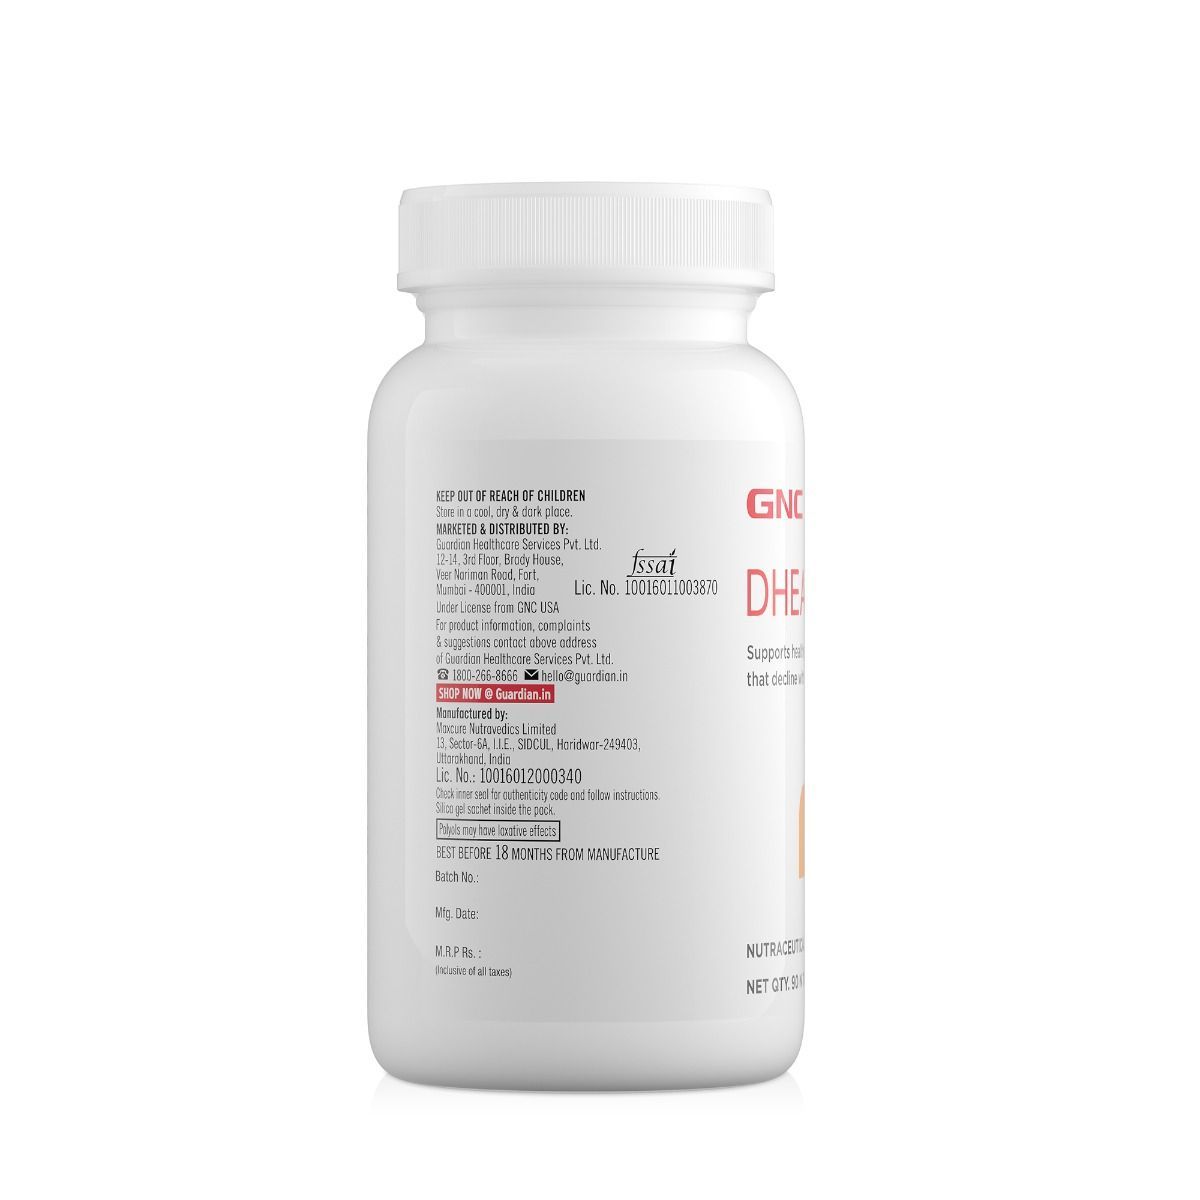 GNC DHEA 50 mg (For Healthy Aging)